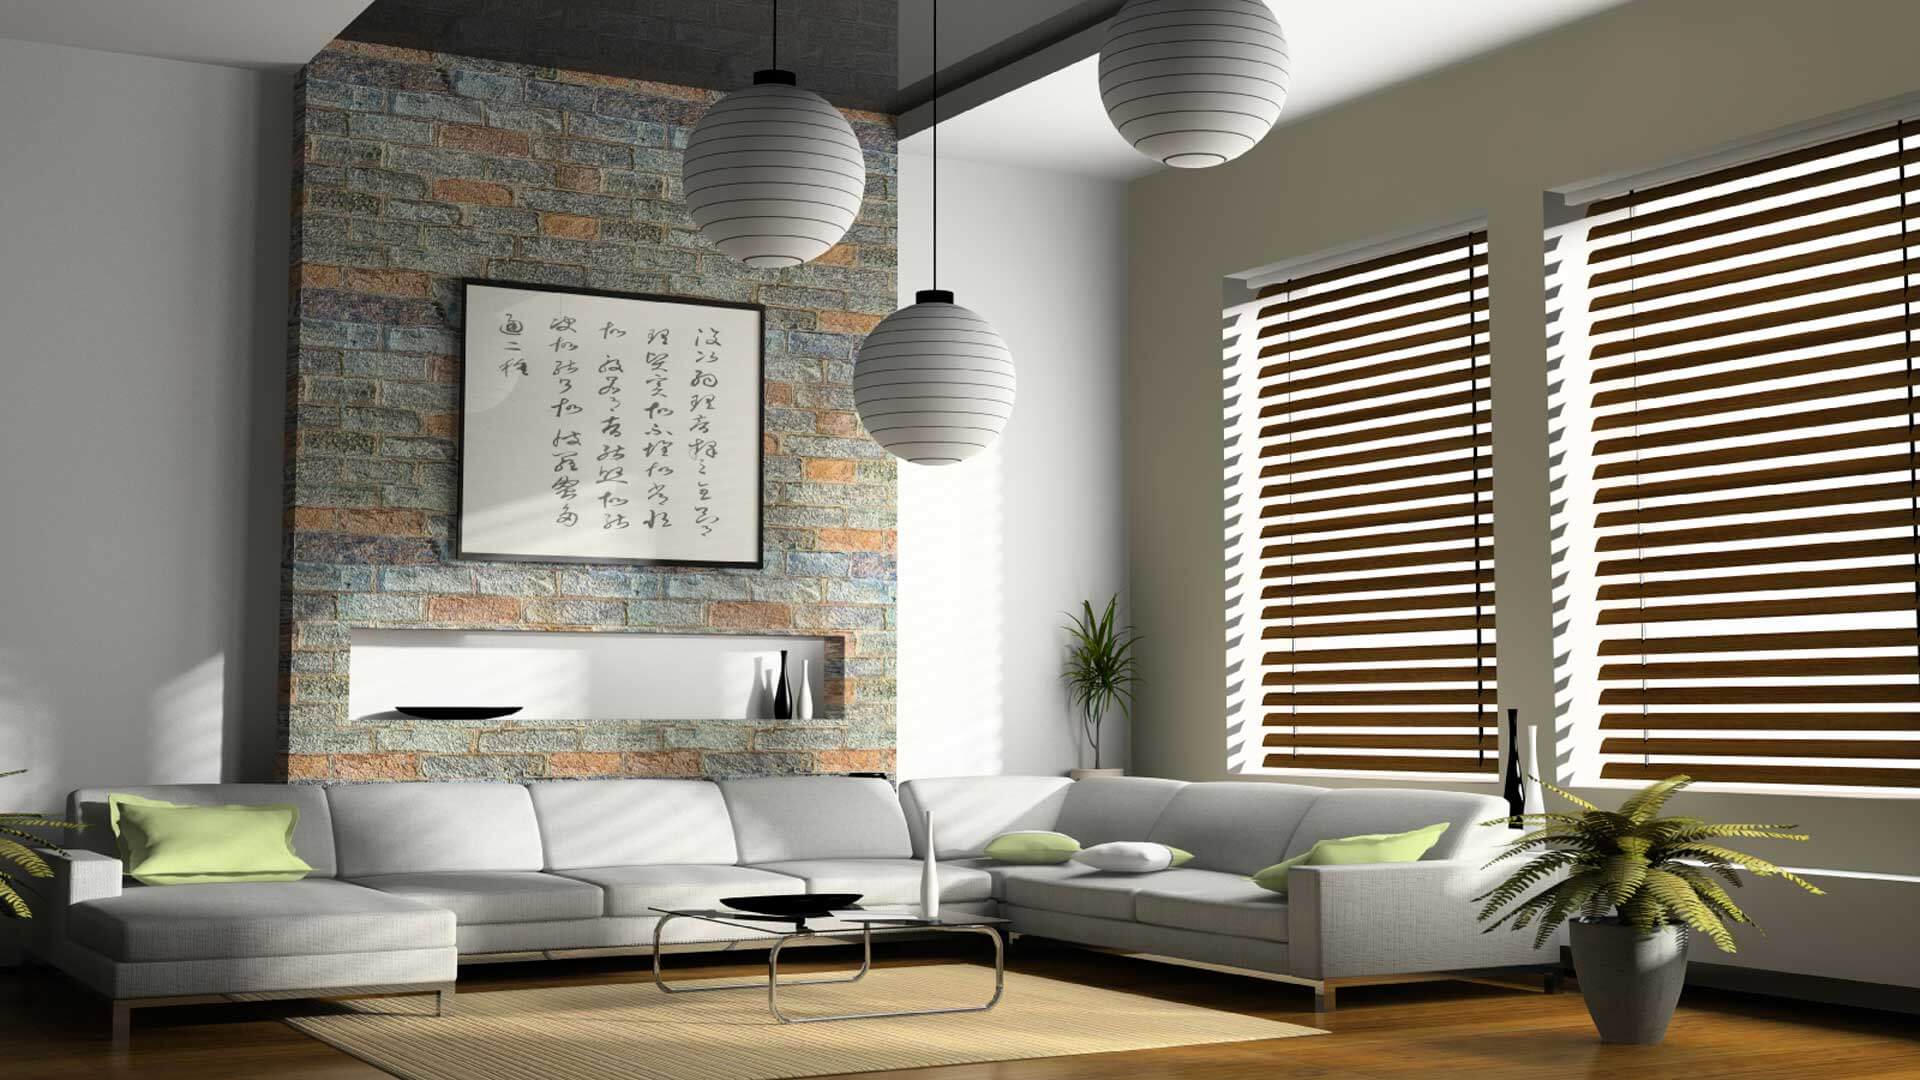 Things You Will Need to Know Before Purchasing Blinds on the Internet